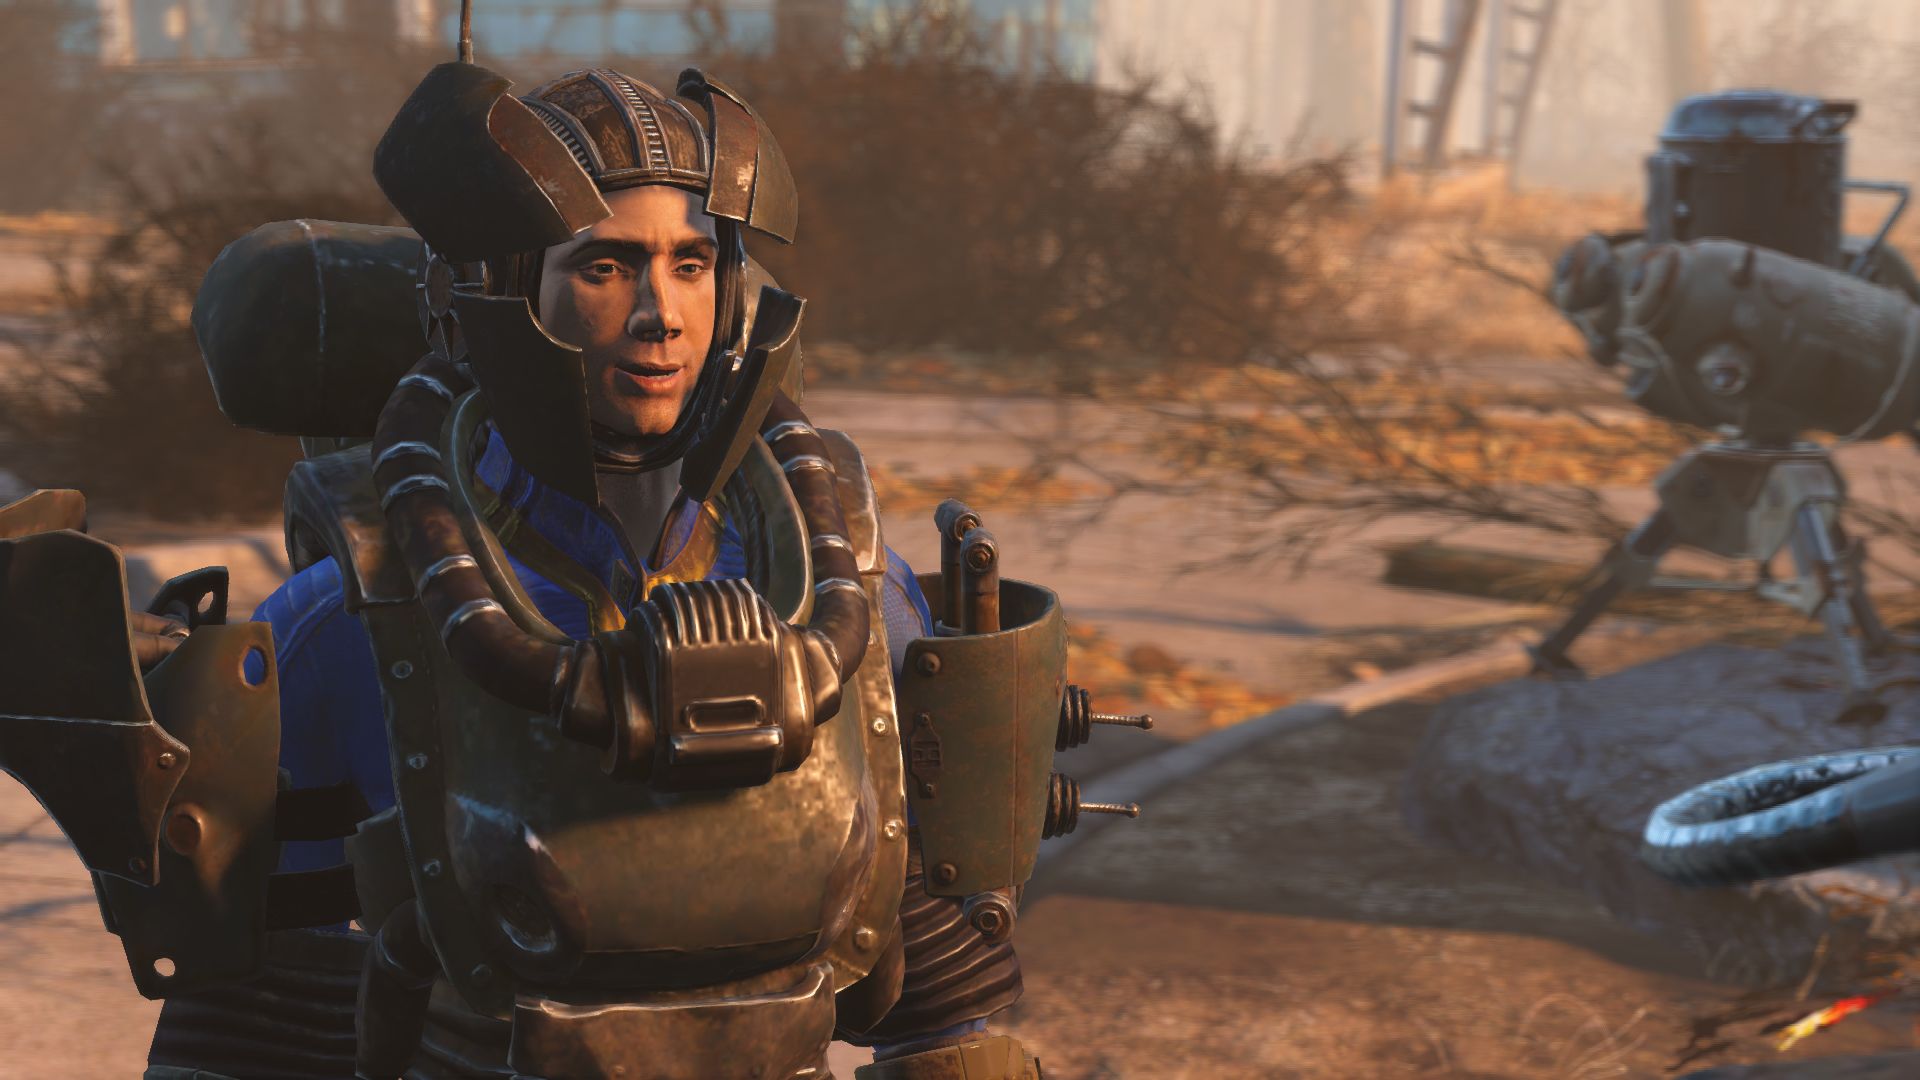 Fallout 4 дополнения 2022. Фоллаут 4 Автоматрон. Fallout 4 дополнения Automatron. Фоллаут 76 Штурмотрон. Fallout Штурмотрон арт.